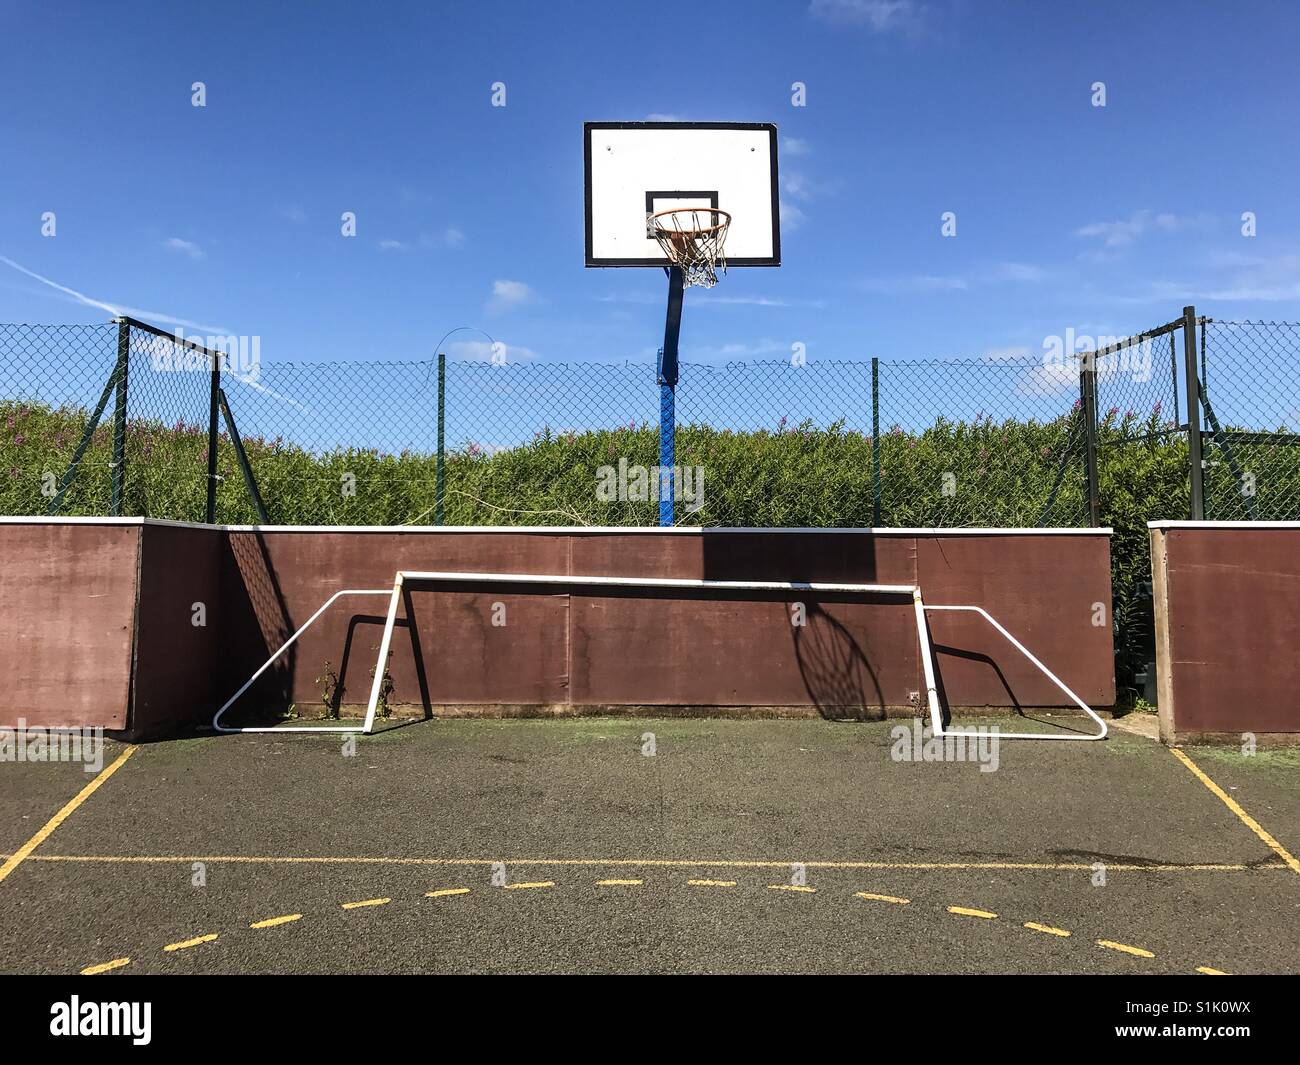 A basketball hoop and a collapsed football goal on a neglected community sports court in England. Stock Photo